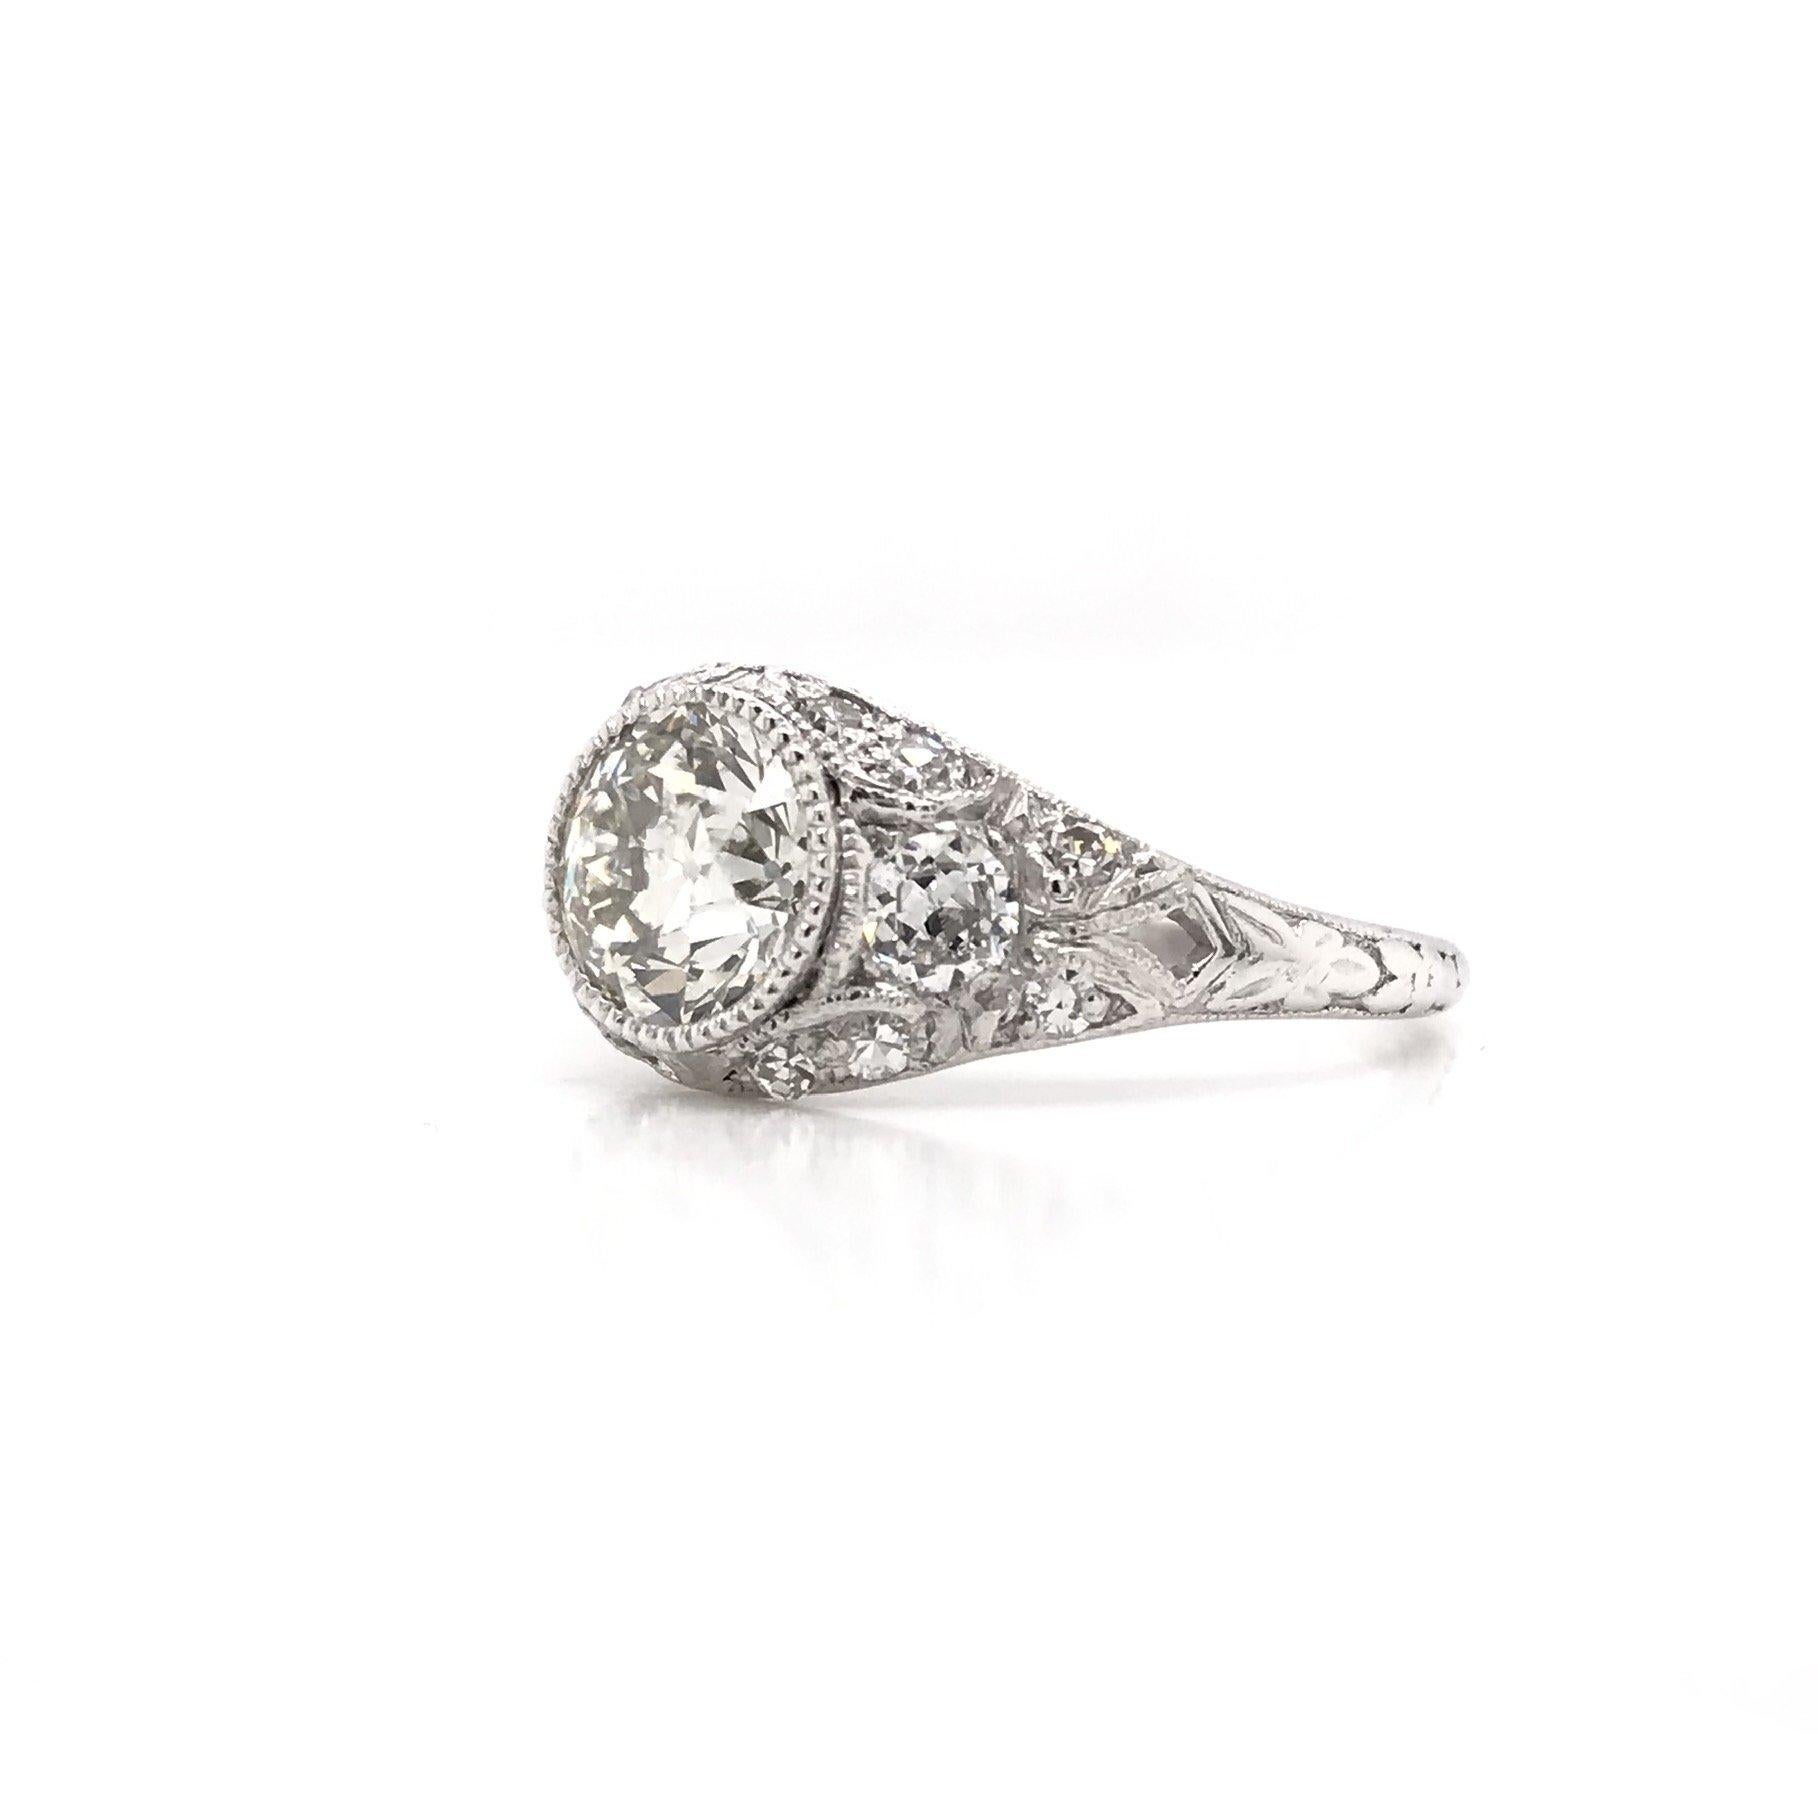 This antique piece was skillfully handcrafted sometime during the Edwardian design period ( 1901-1920 ). Soft, floral, feminine, this Edwardian diamond ring is absolutely unforgettable. The dazzling center diamond is skillfully set in a decorative